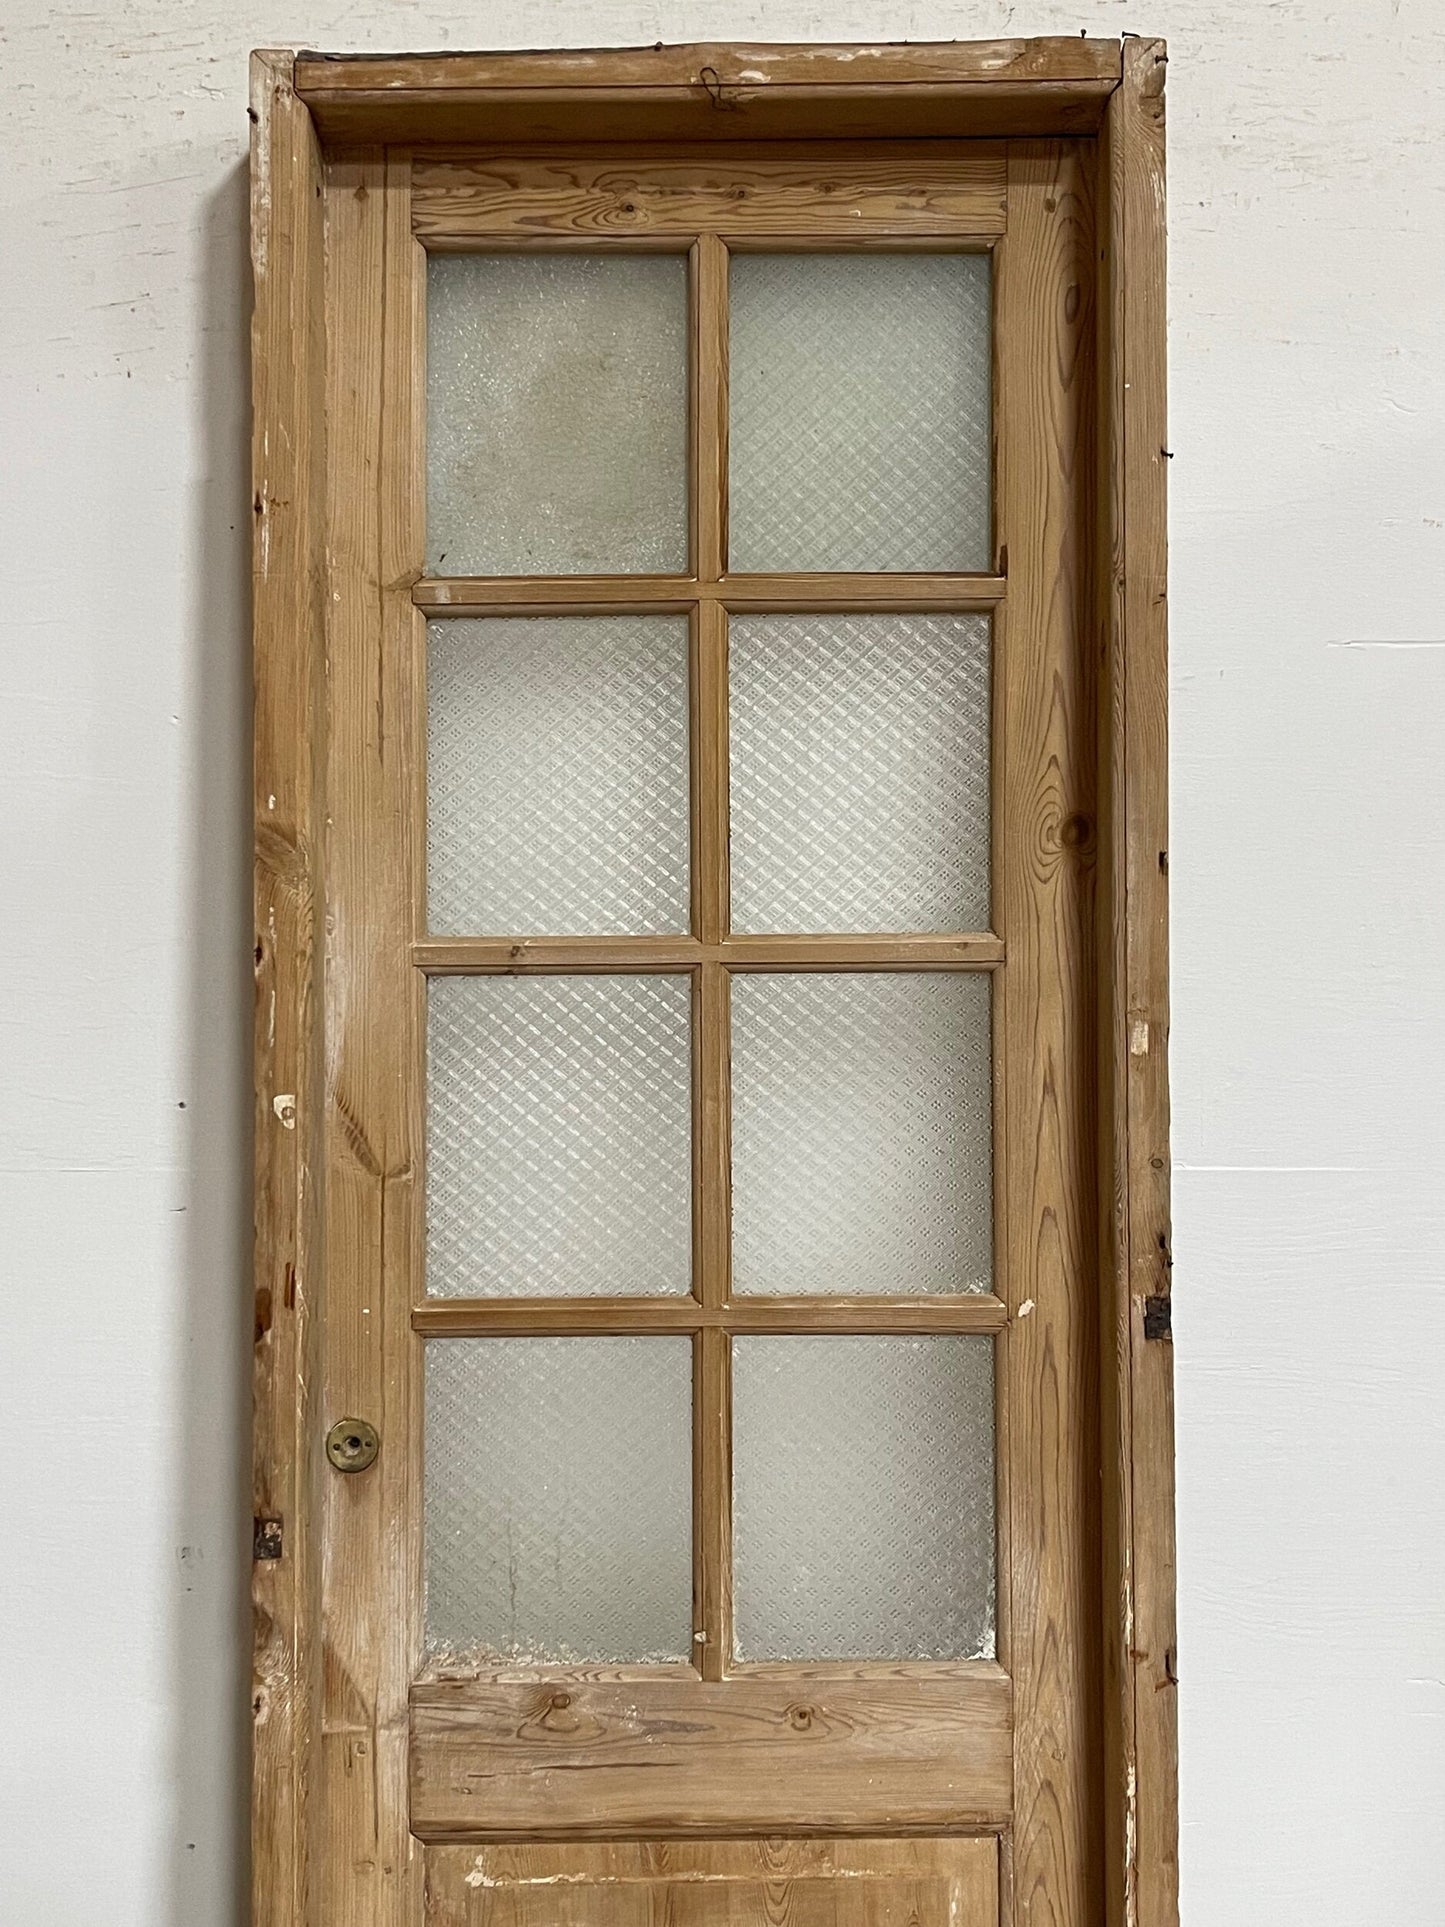 Antique French panel door with glass (F 86.5x30.5) (D 84.75x27.25) I231